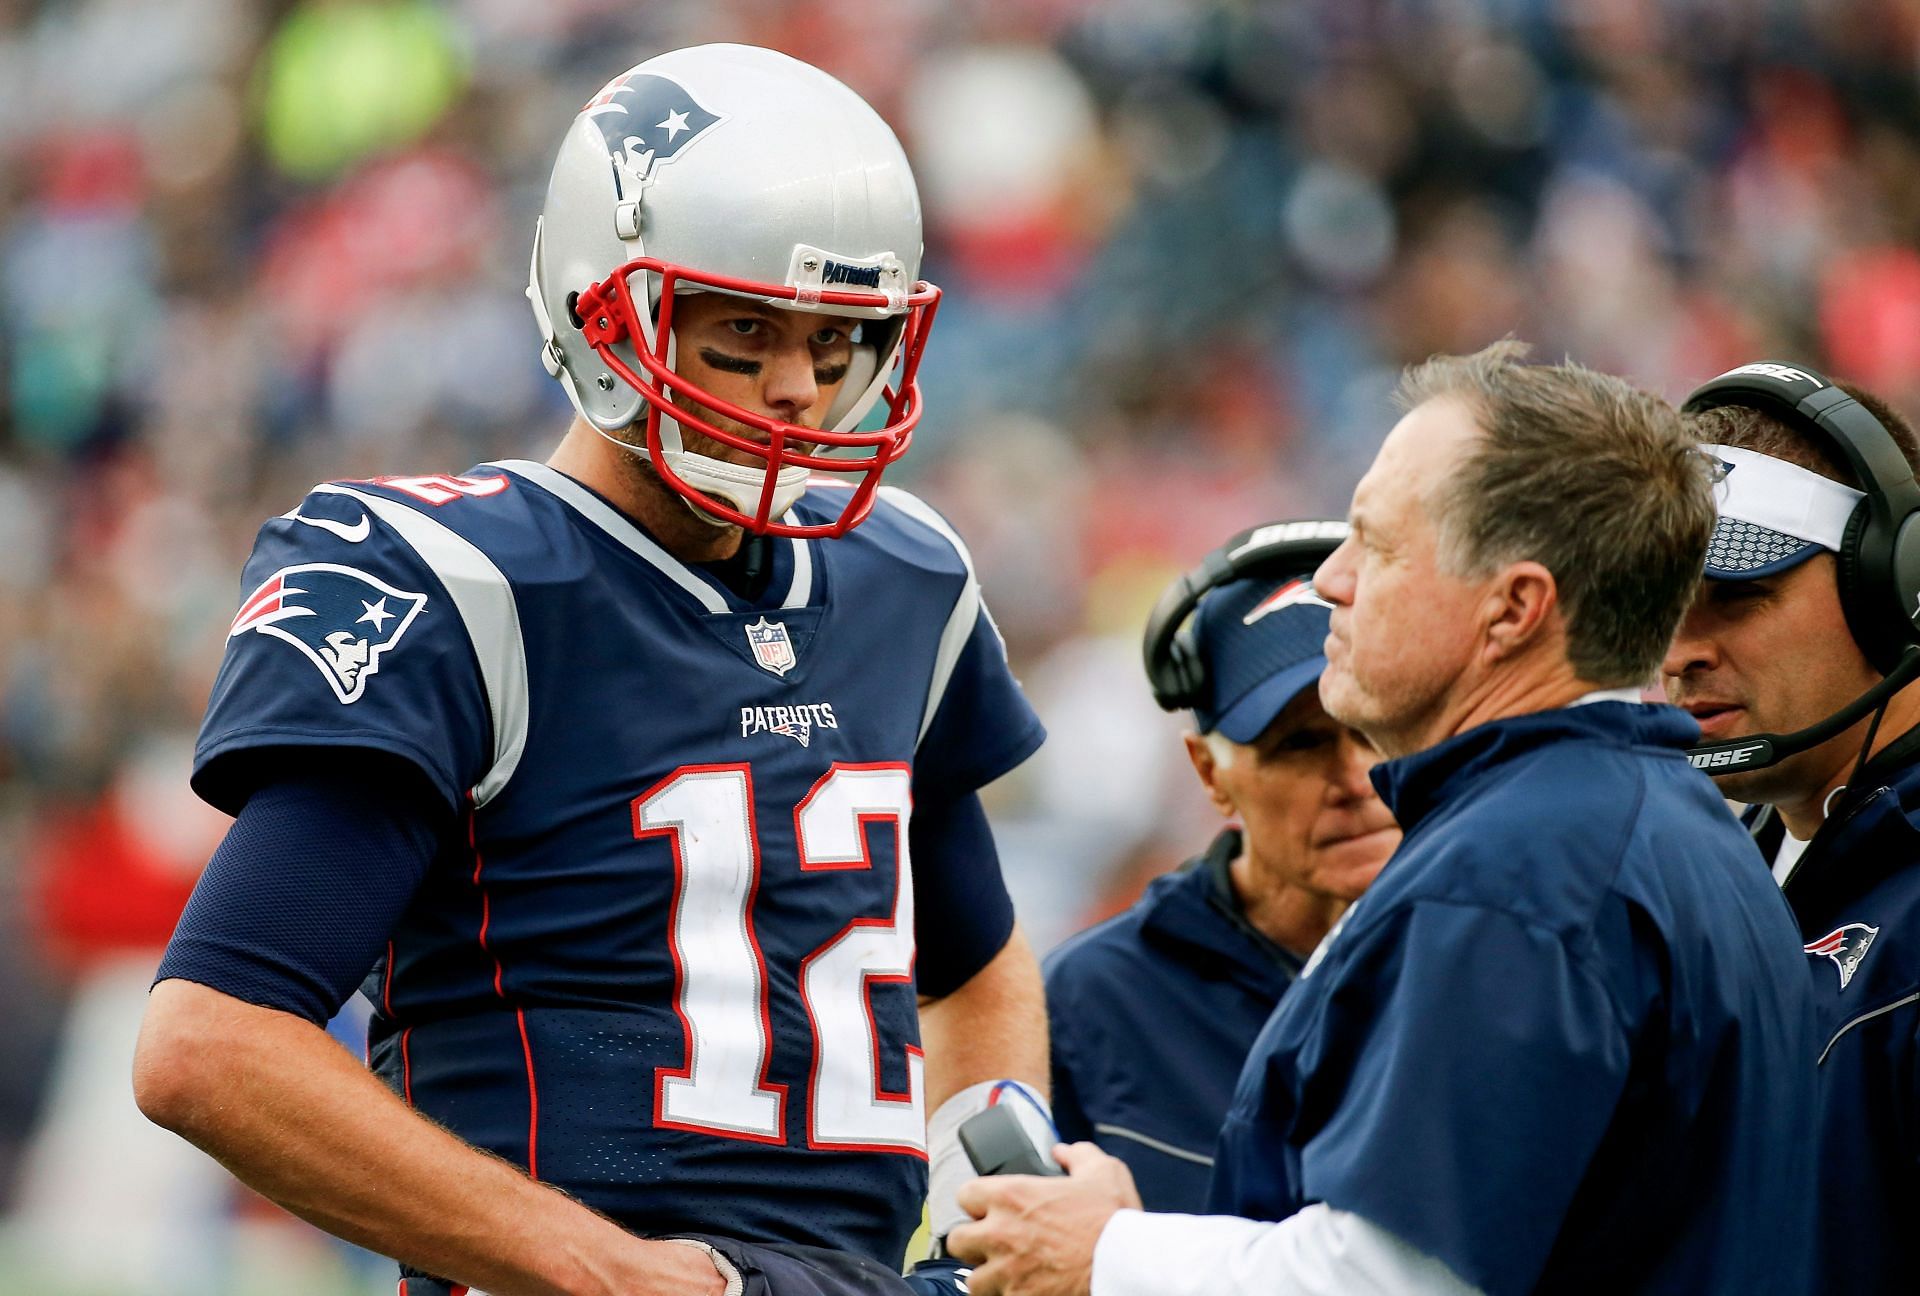 Could Brady and Belichick face off in the Super Bowl?